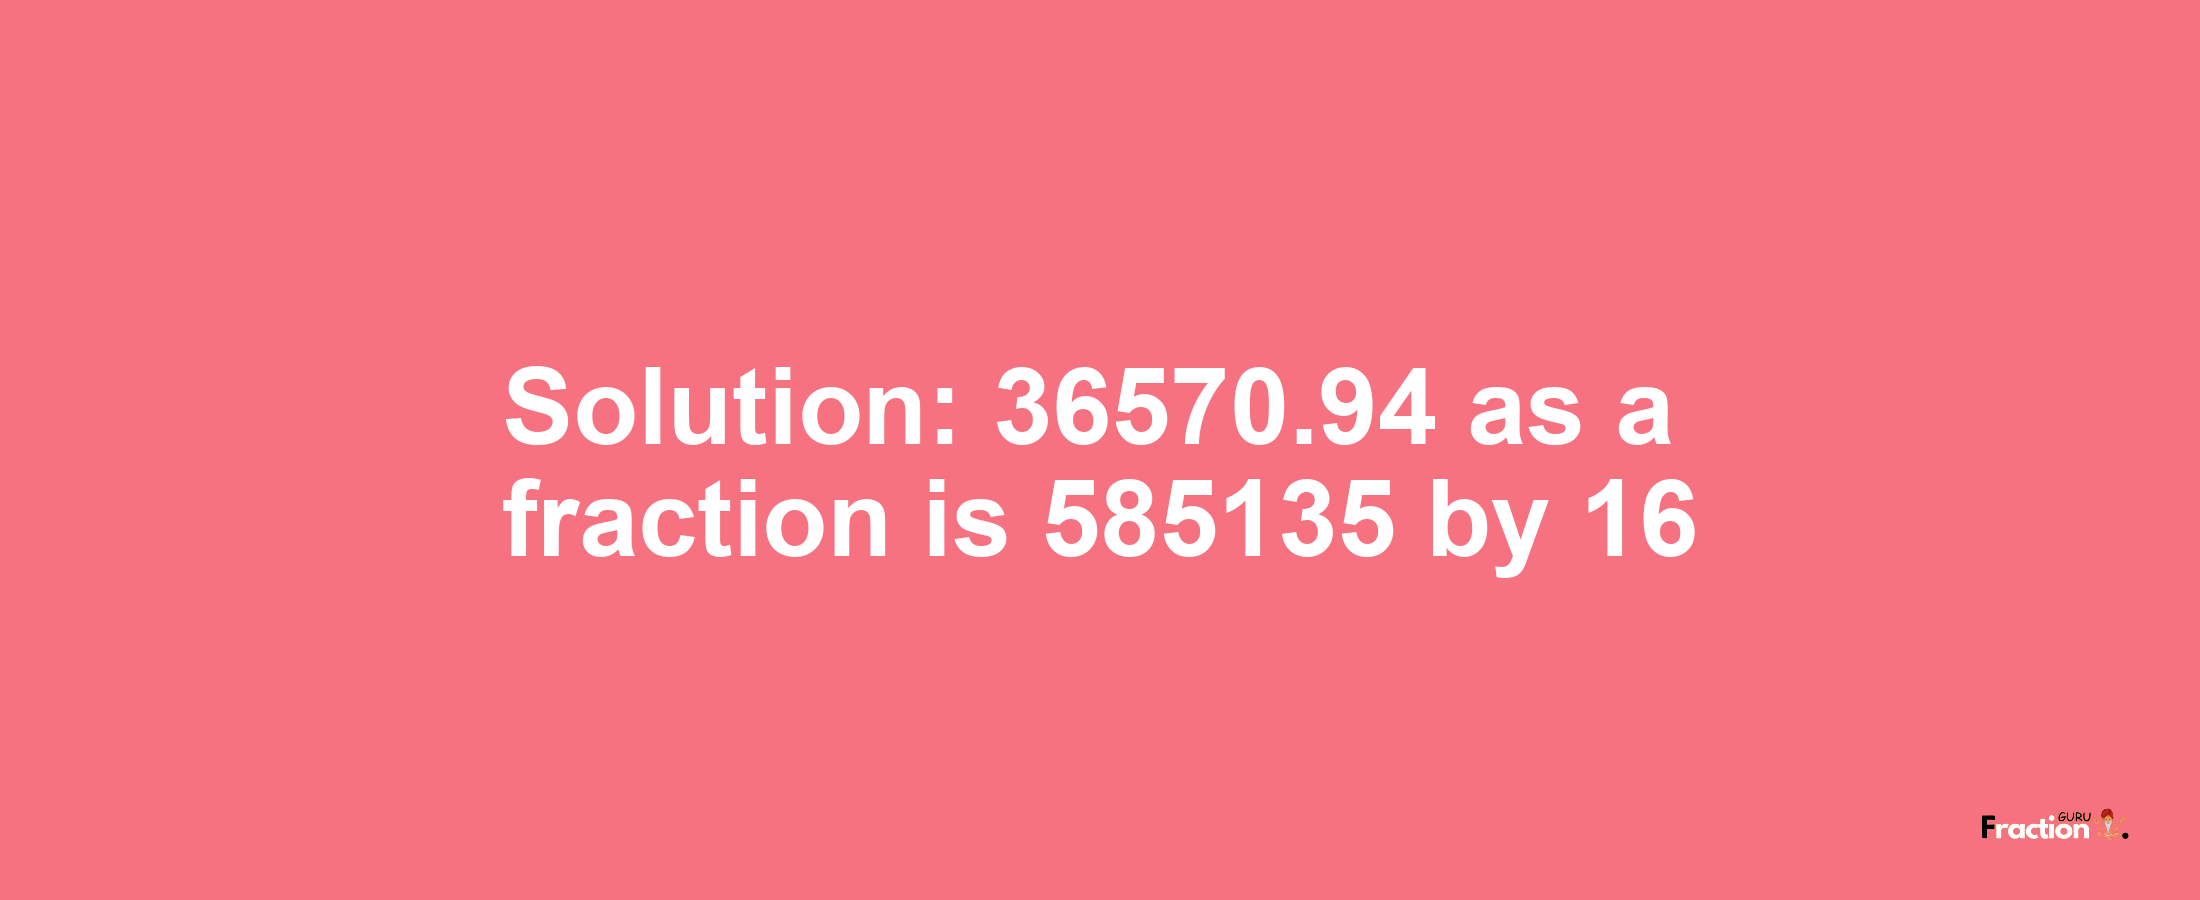 Solution:36570.94 as a fraction is 585135/16